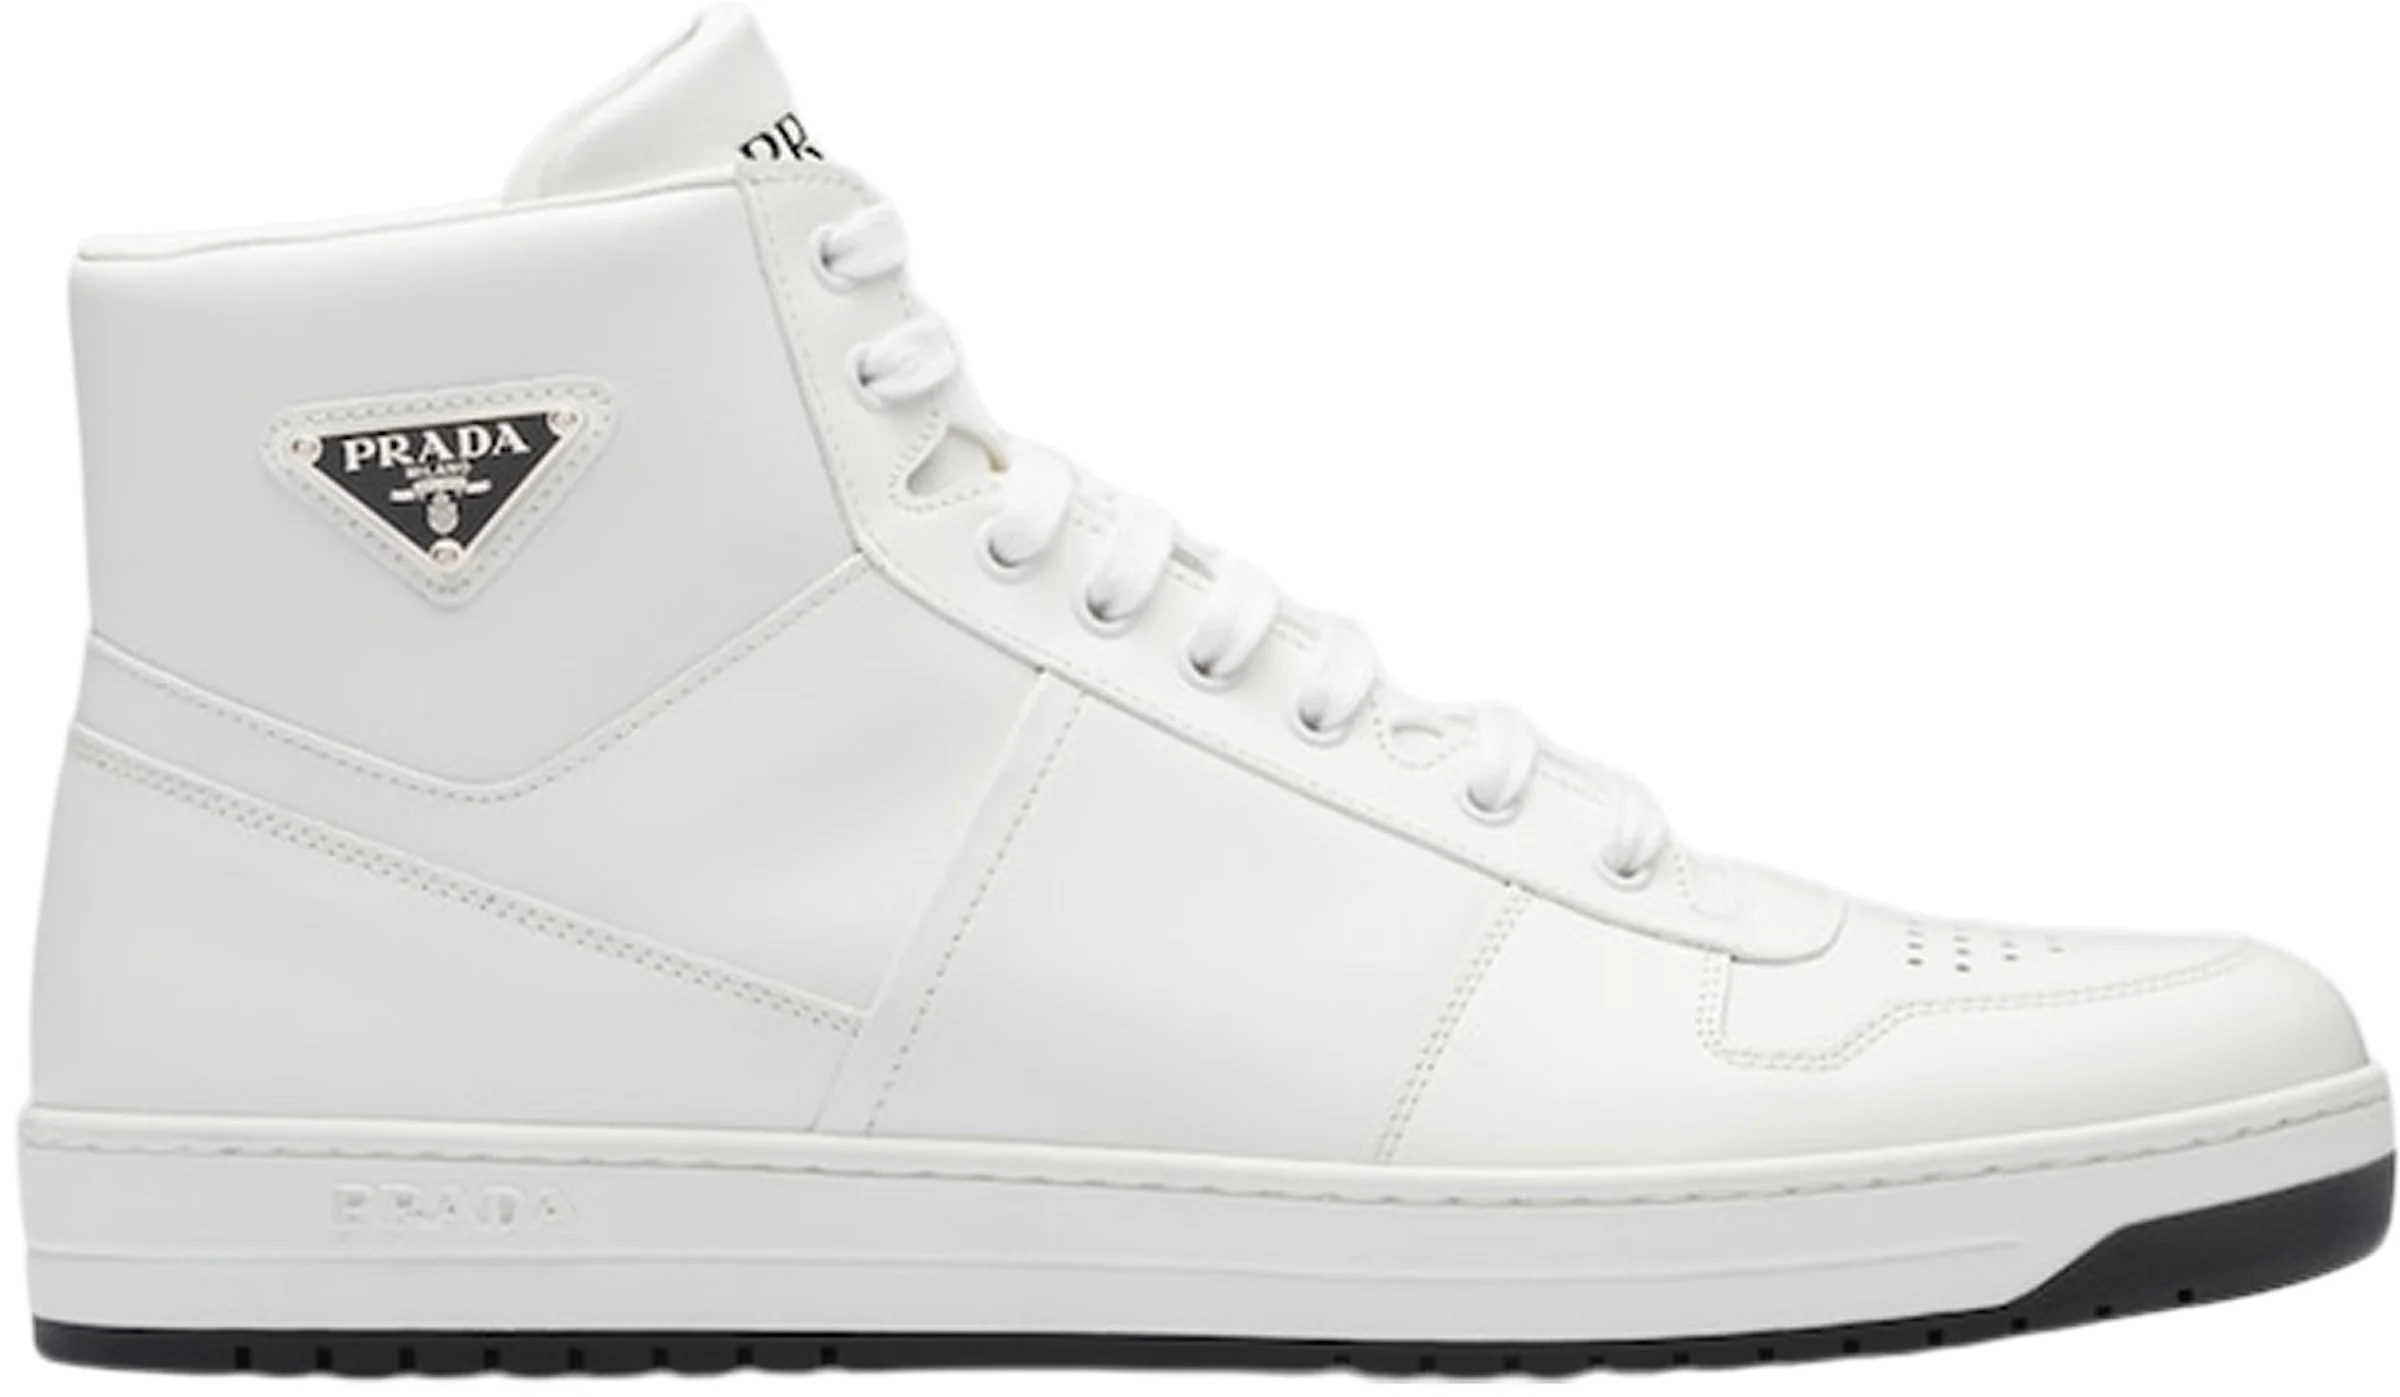 https://images.stockx.com/images/Prada-Downtown-High-Top-Sneakers-Leather-White-White-Black.jpg?fit=fill&bg=FFFFFF&w=1200&h=857&fm=webp&auto=compress&dpr=2&trim=color&updated_at=1661254248&q=60